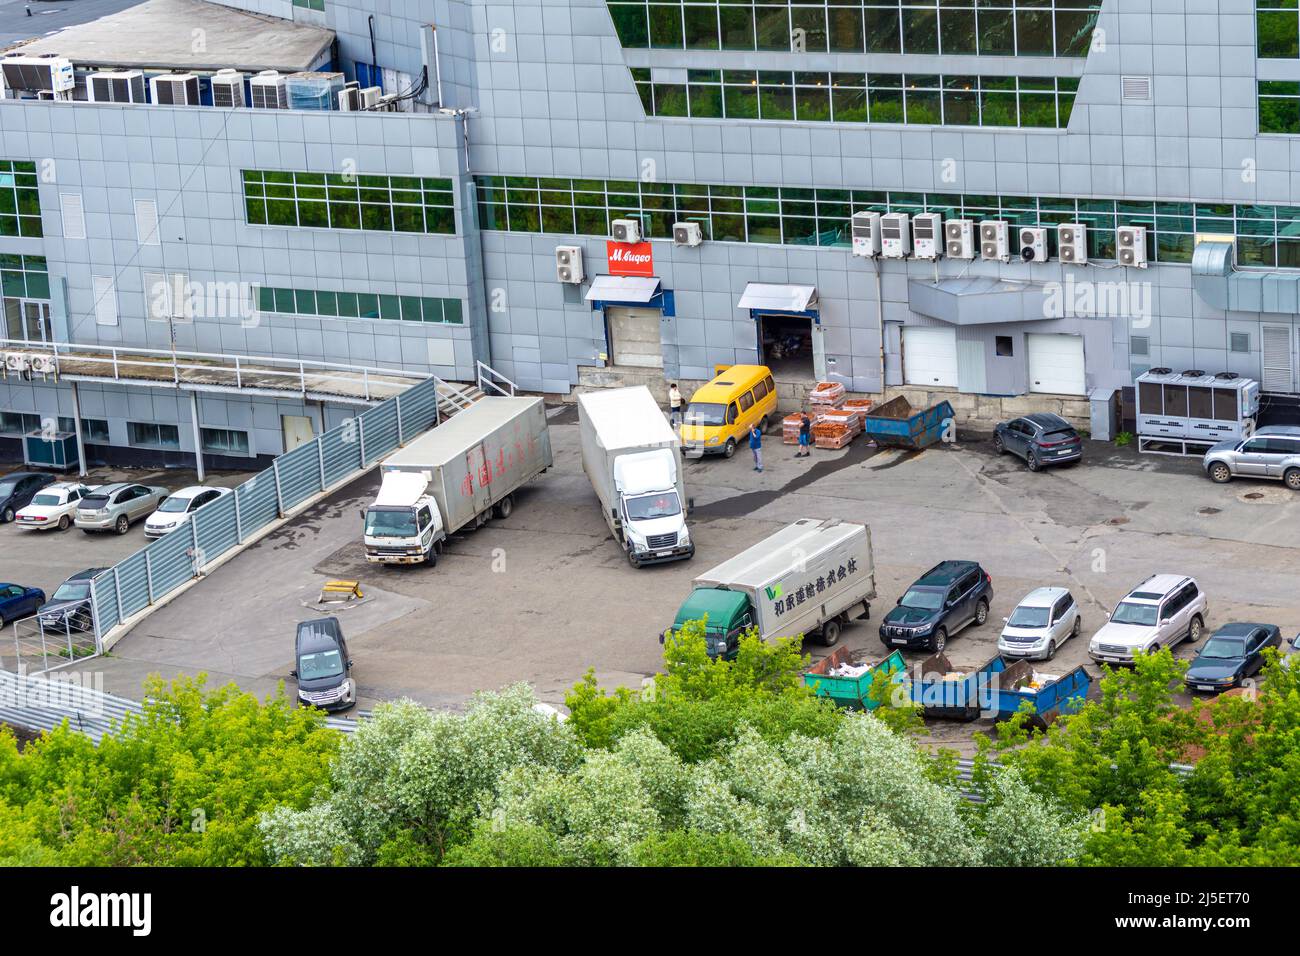 Kemerovo, Russia - June 24, 2021. A large building with cars and unloading trucks, the backyard of a multi-level shopping center or a product warehous Stock Photo